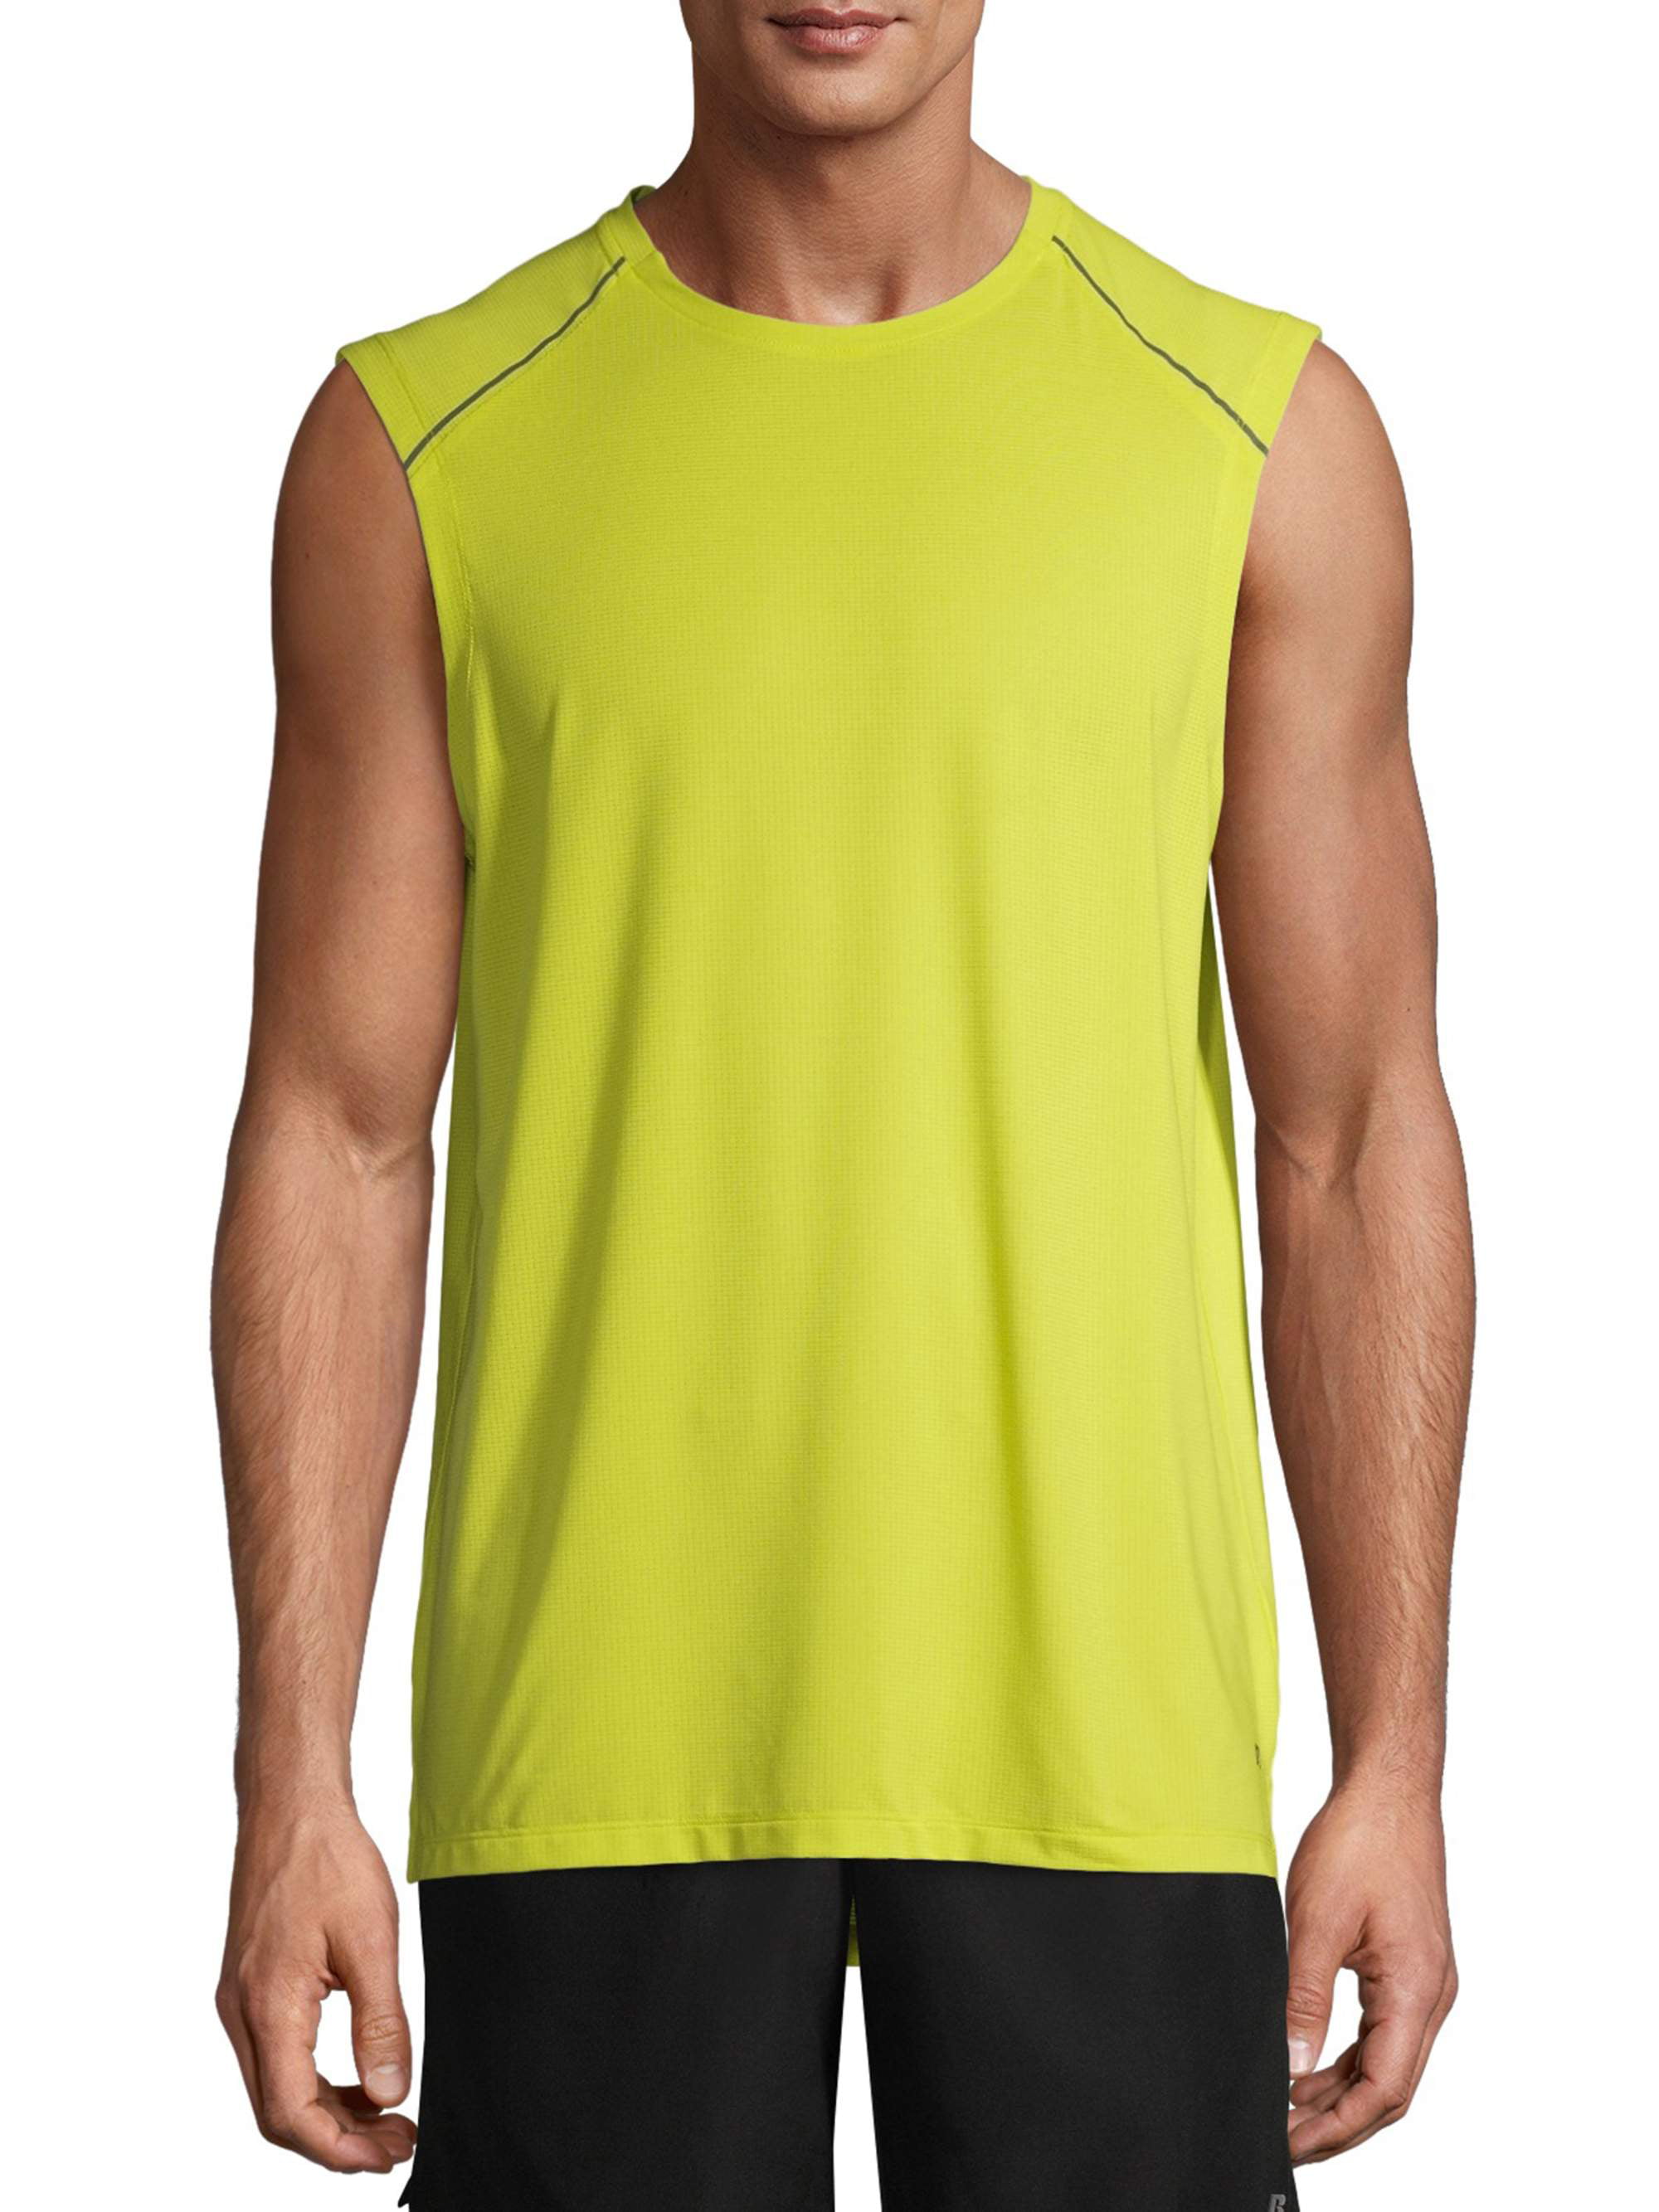 Russell - Russell Men's and Big Men's Muscle Sleeveless Colorblock Tank ...